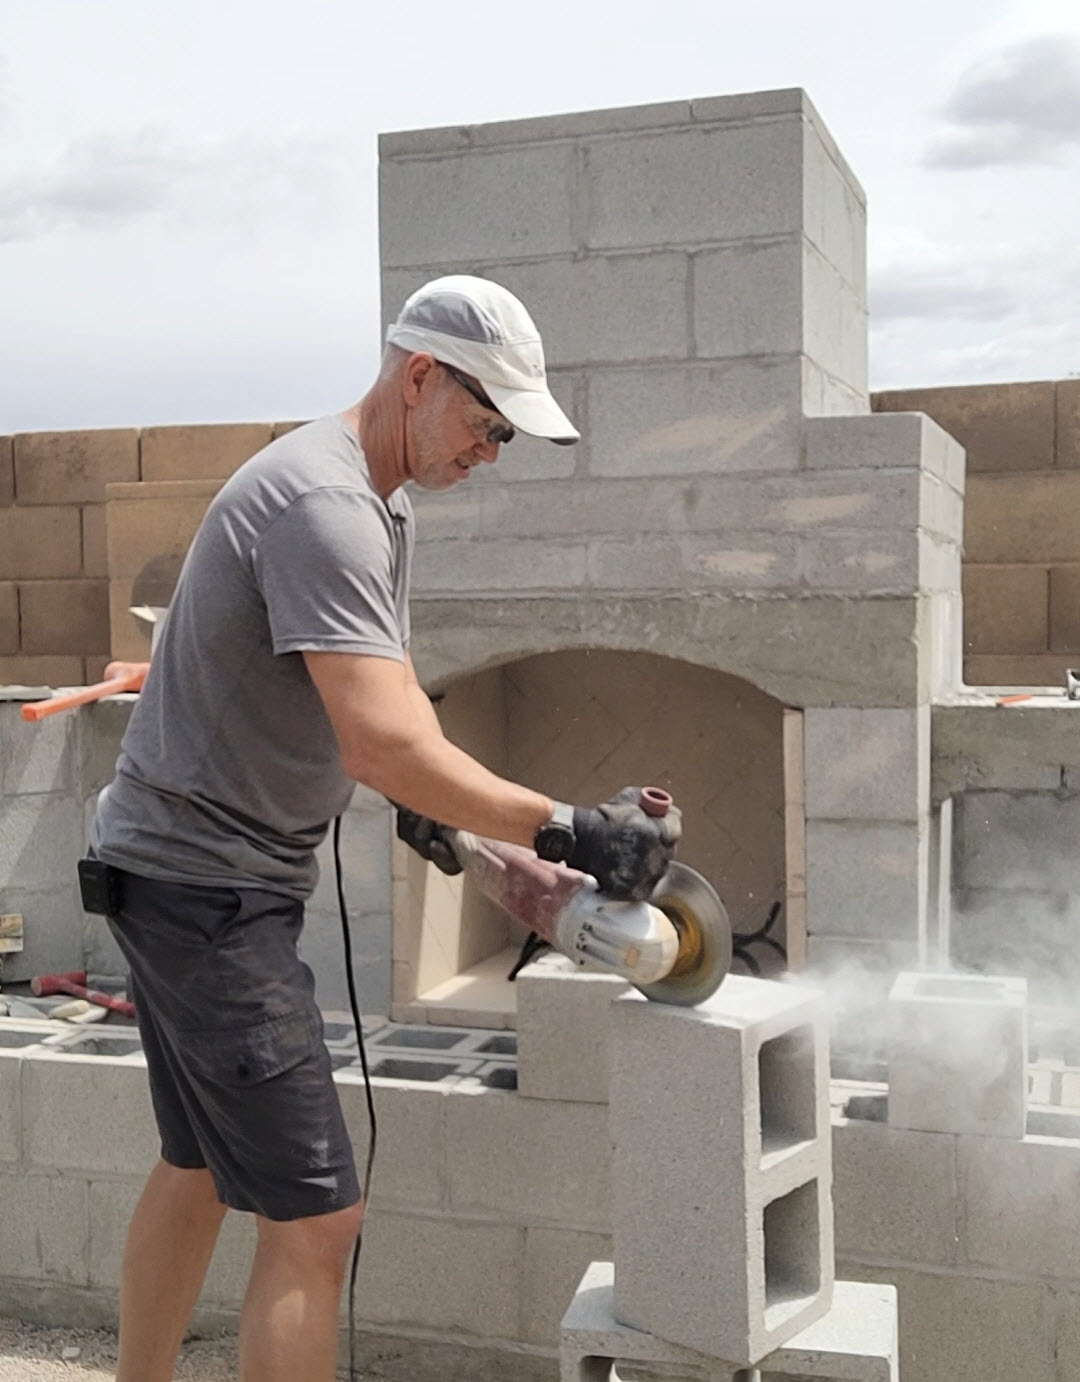 Man in white hat cutting cinderblock with a grinder and diamond blade. Dust being created. Masonry DIY outdoor fireplace behind him. Diamond blade and grinder being used on construction.